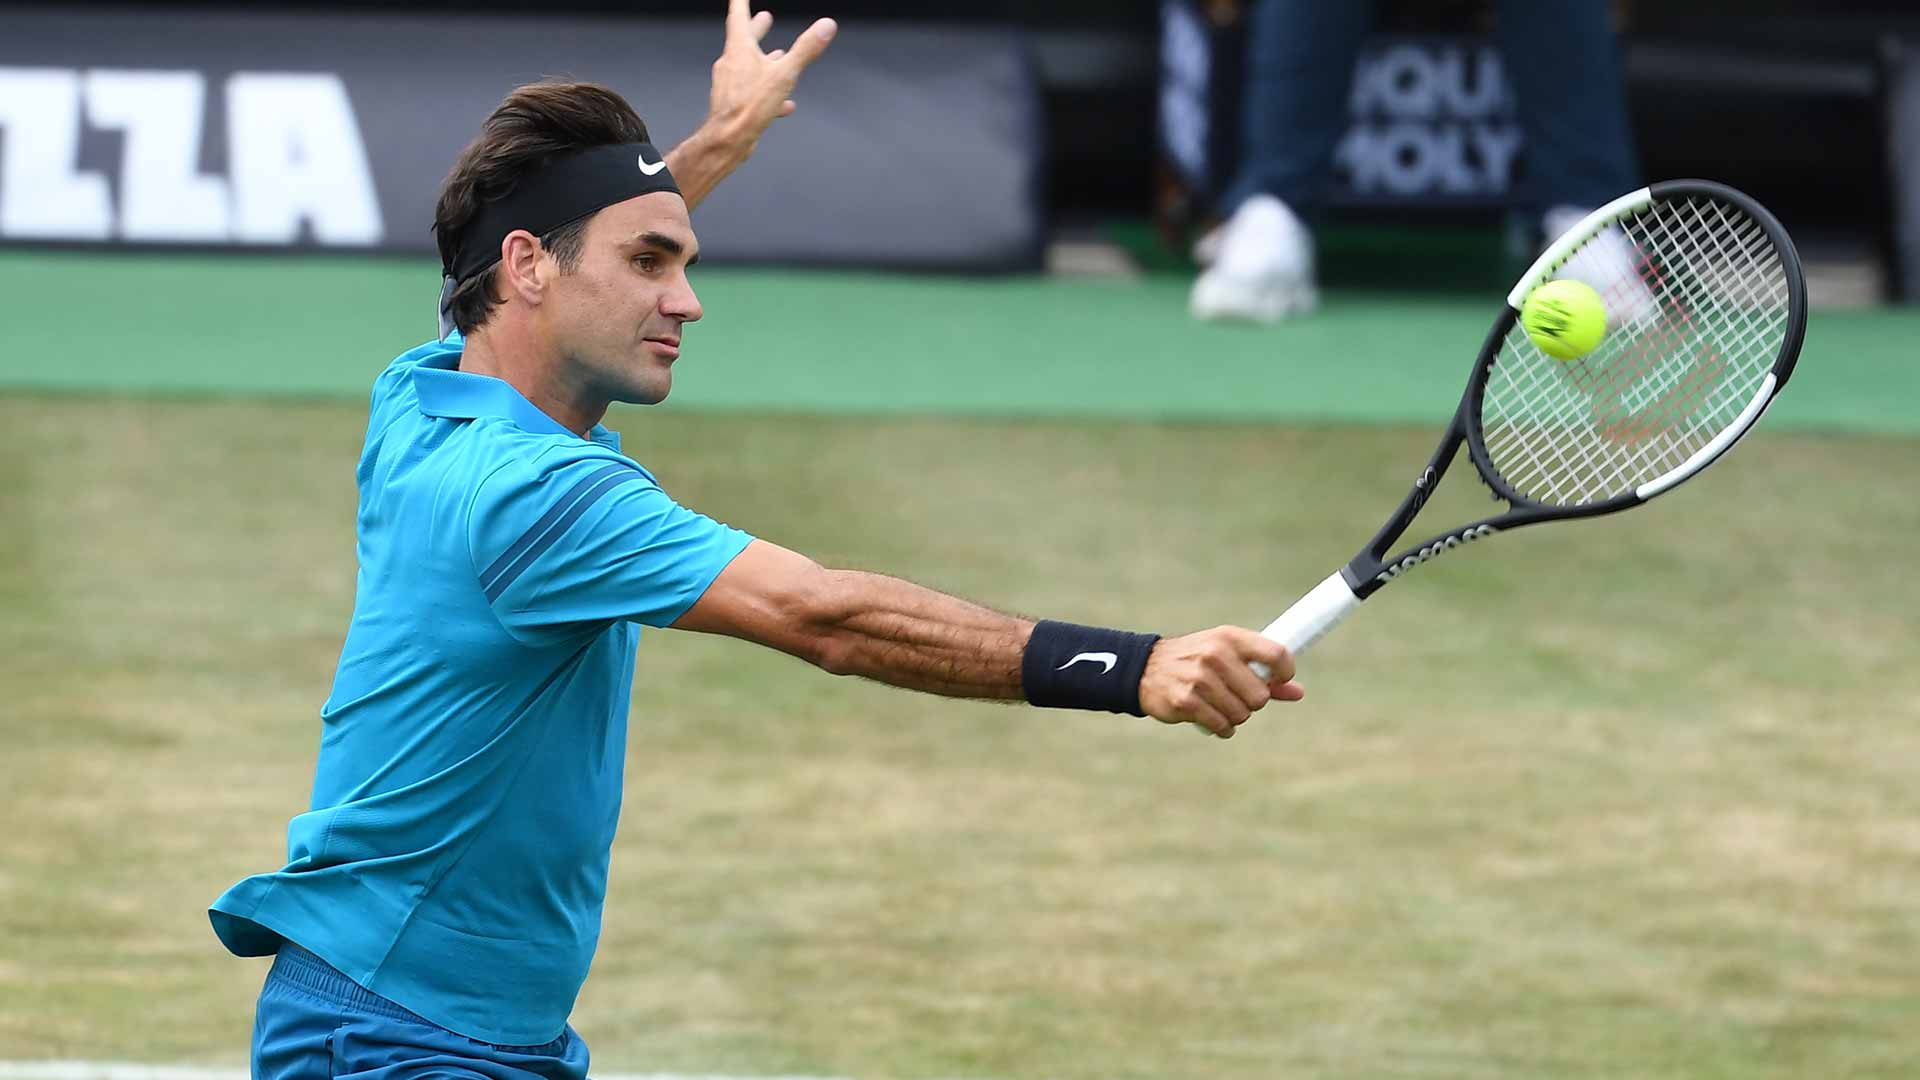 Roger Federer defeats Nick Kyrgios in three sets, winning 85 per cent of first-serve points to advance to the MercedesCup final.